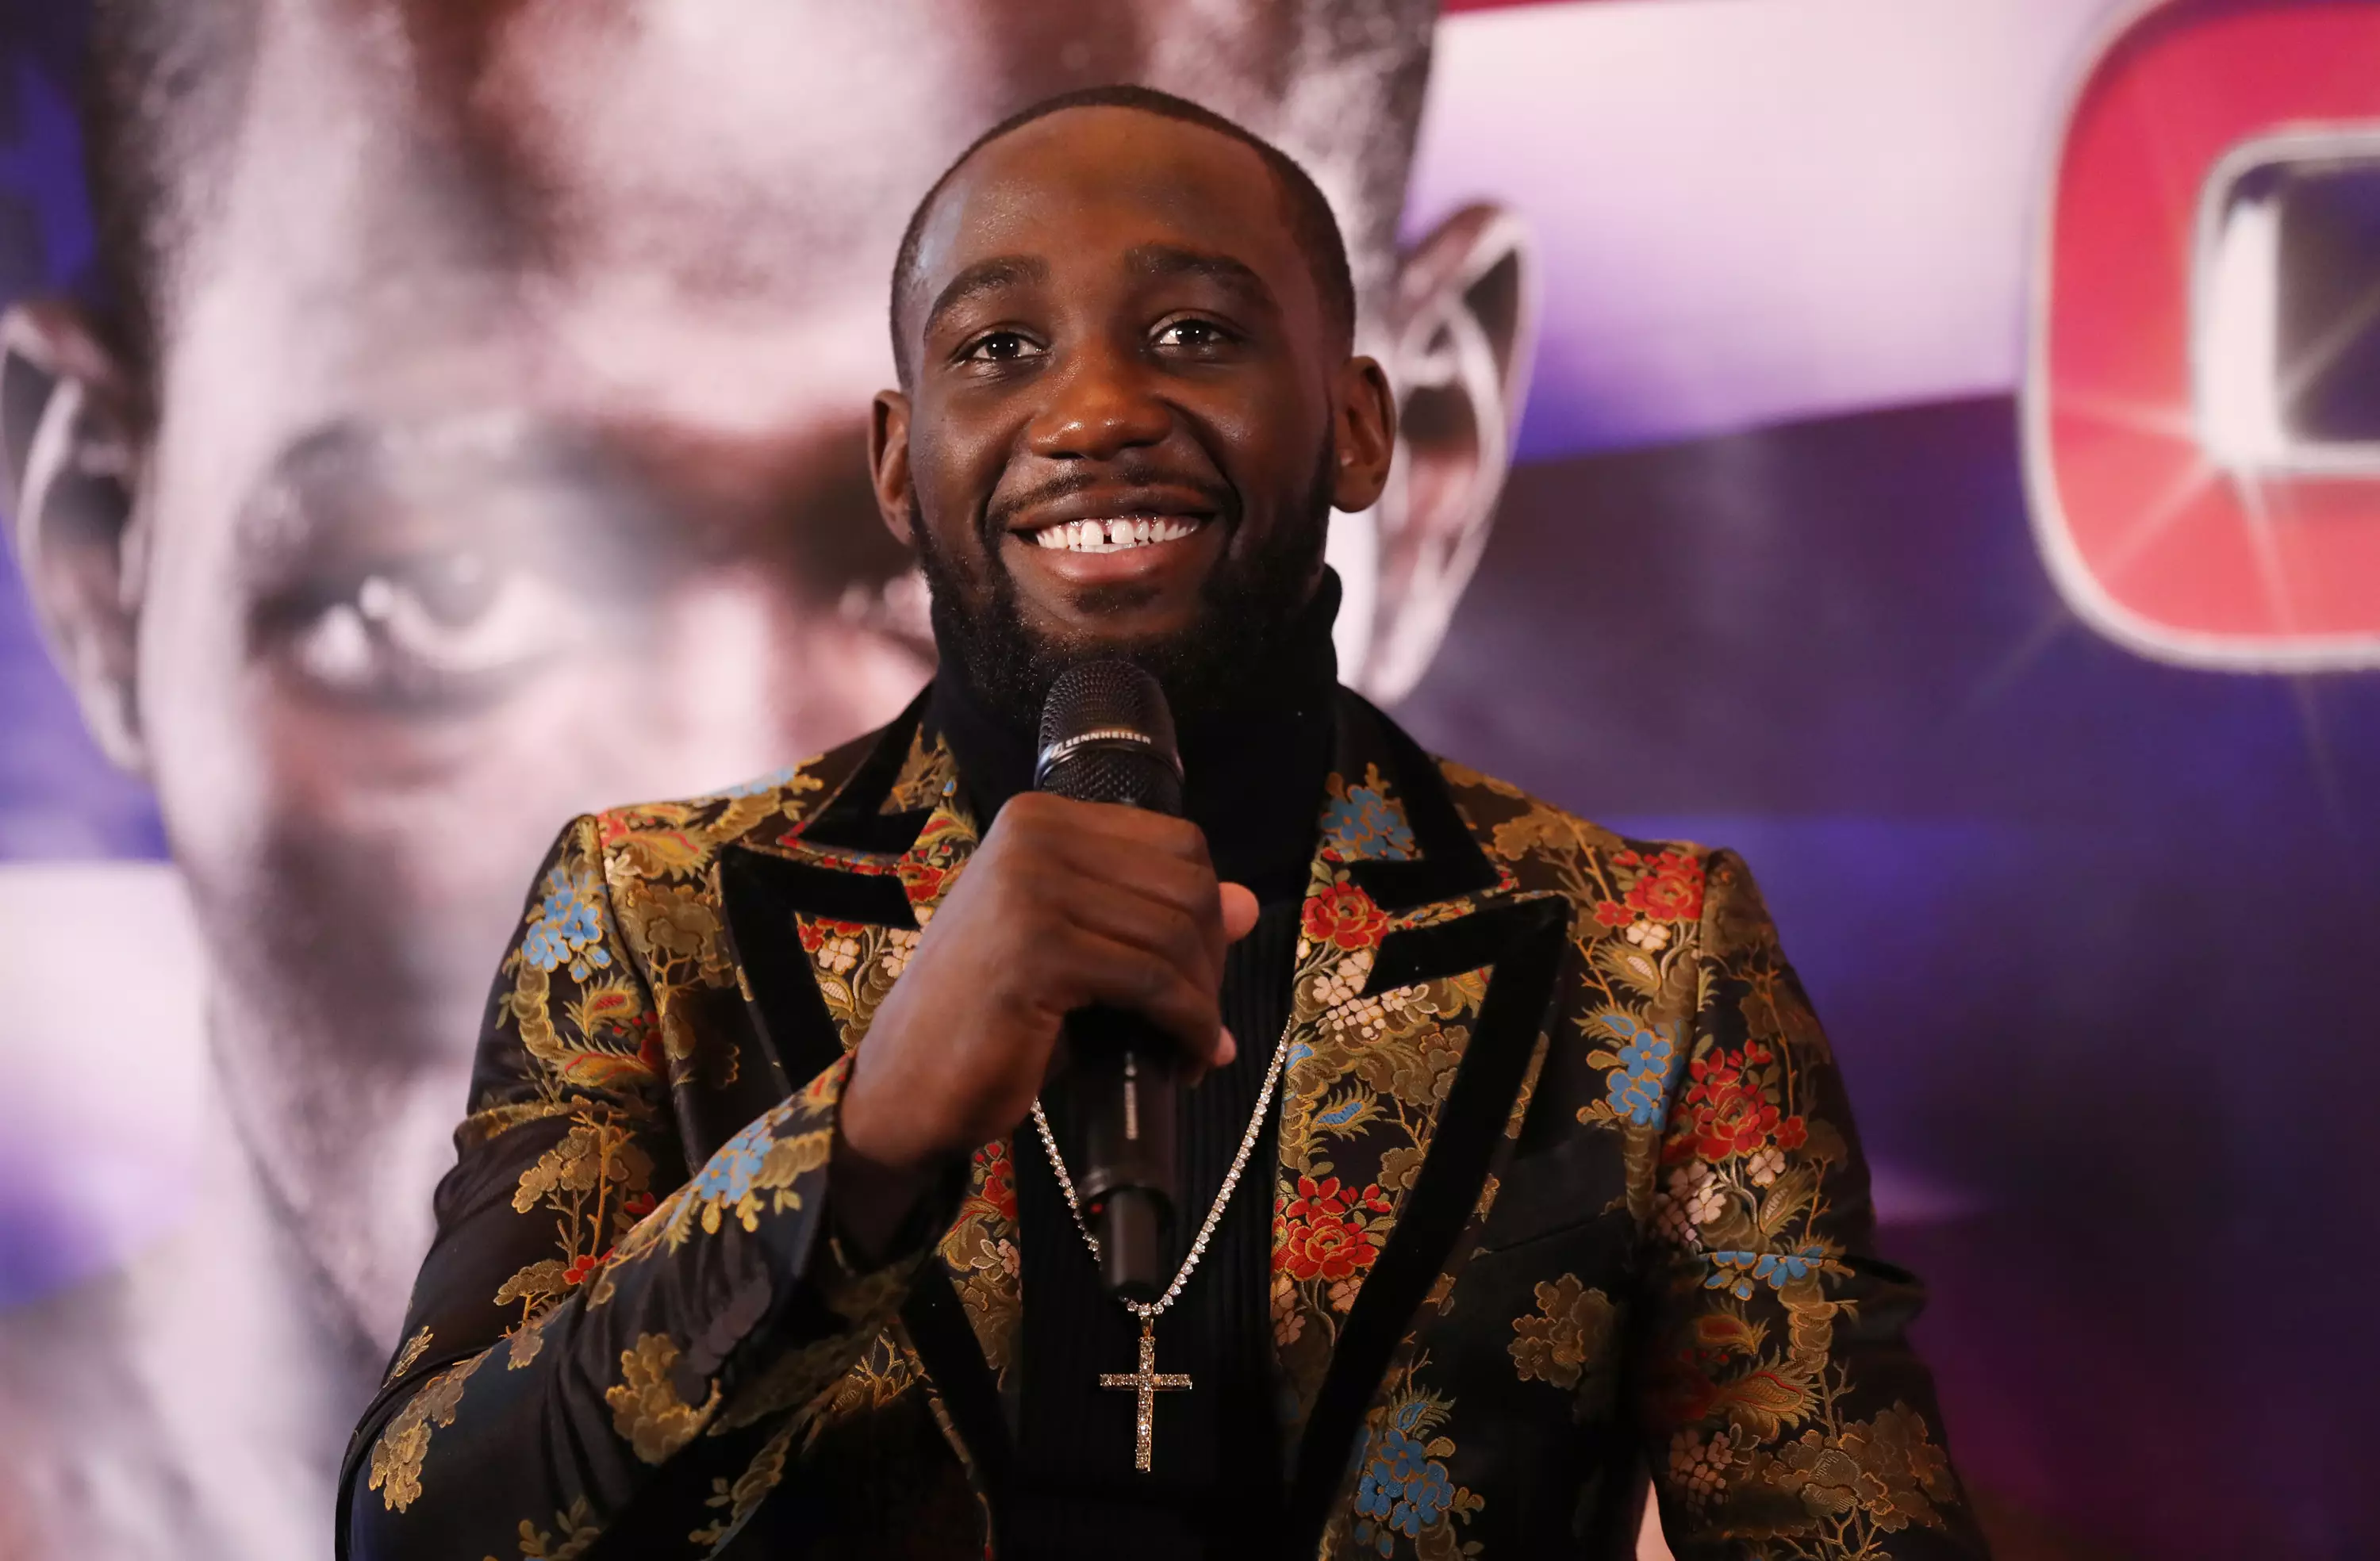 Crawford talks ahead of the fight. Image: PA Images